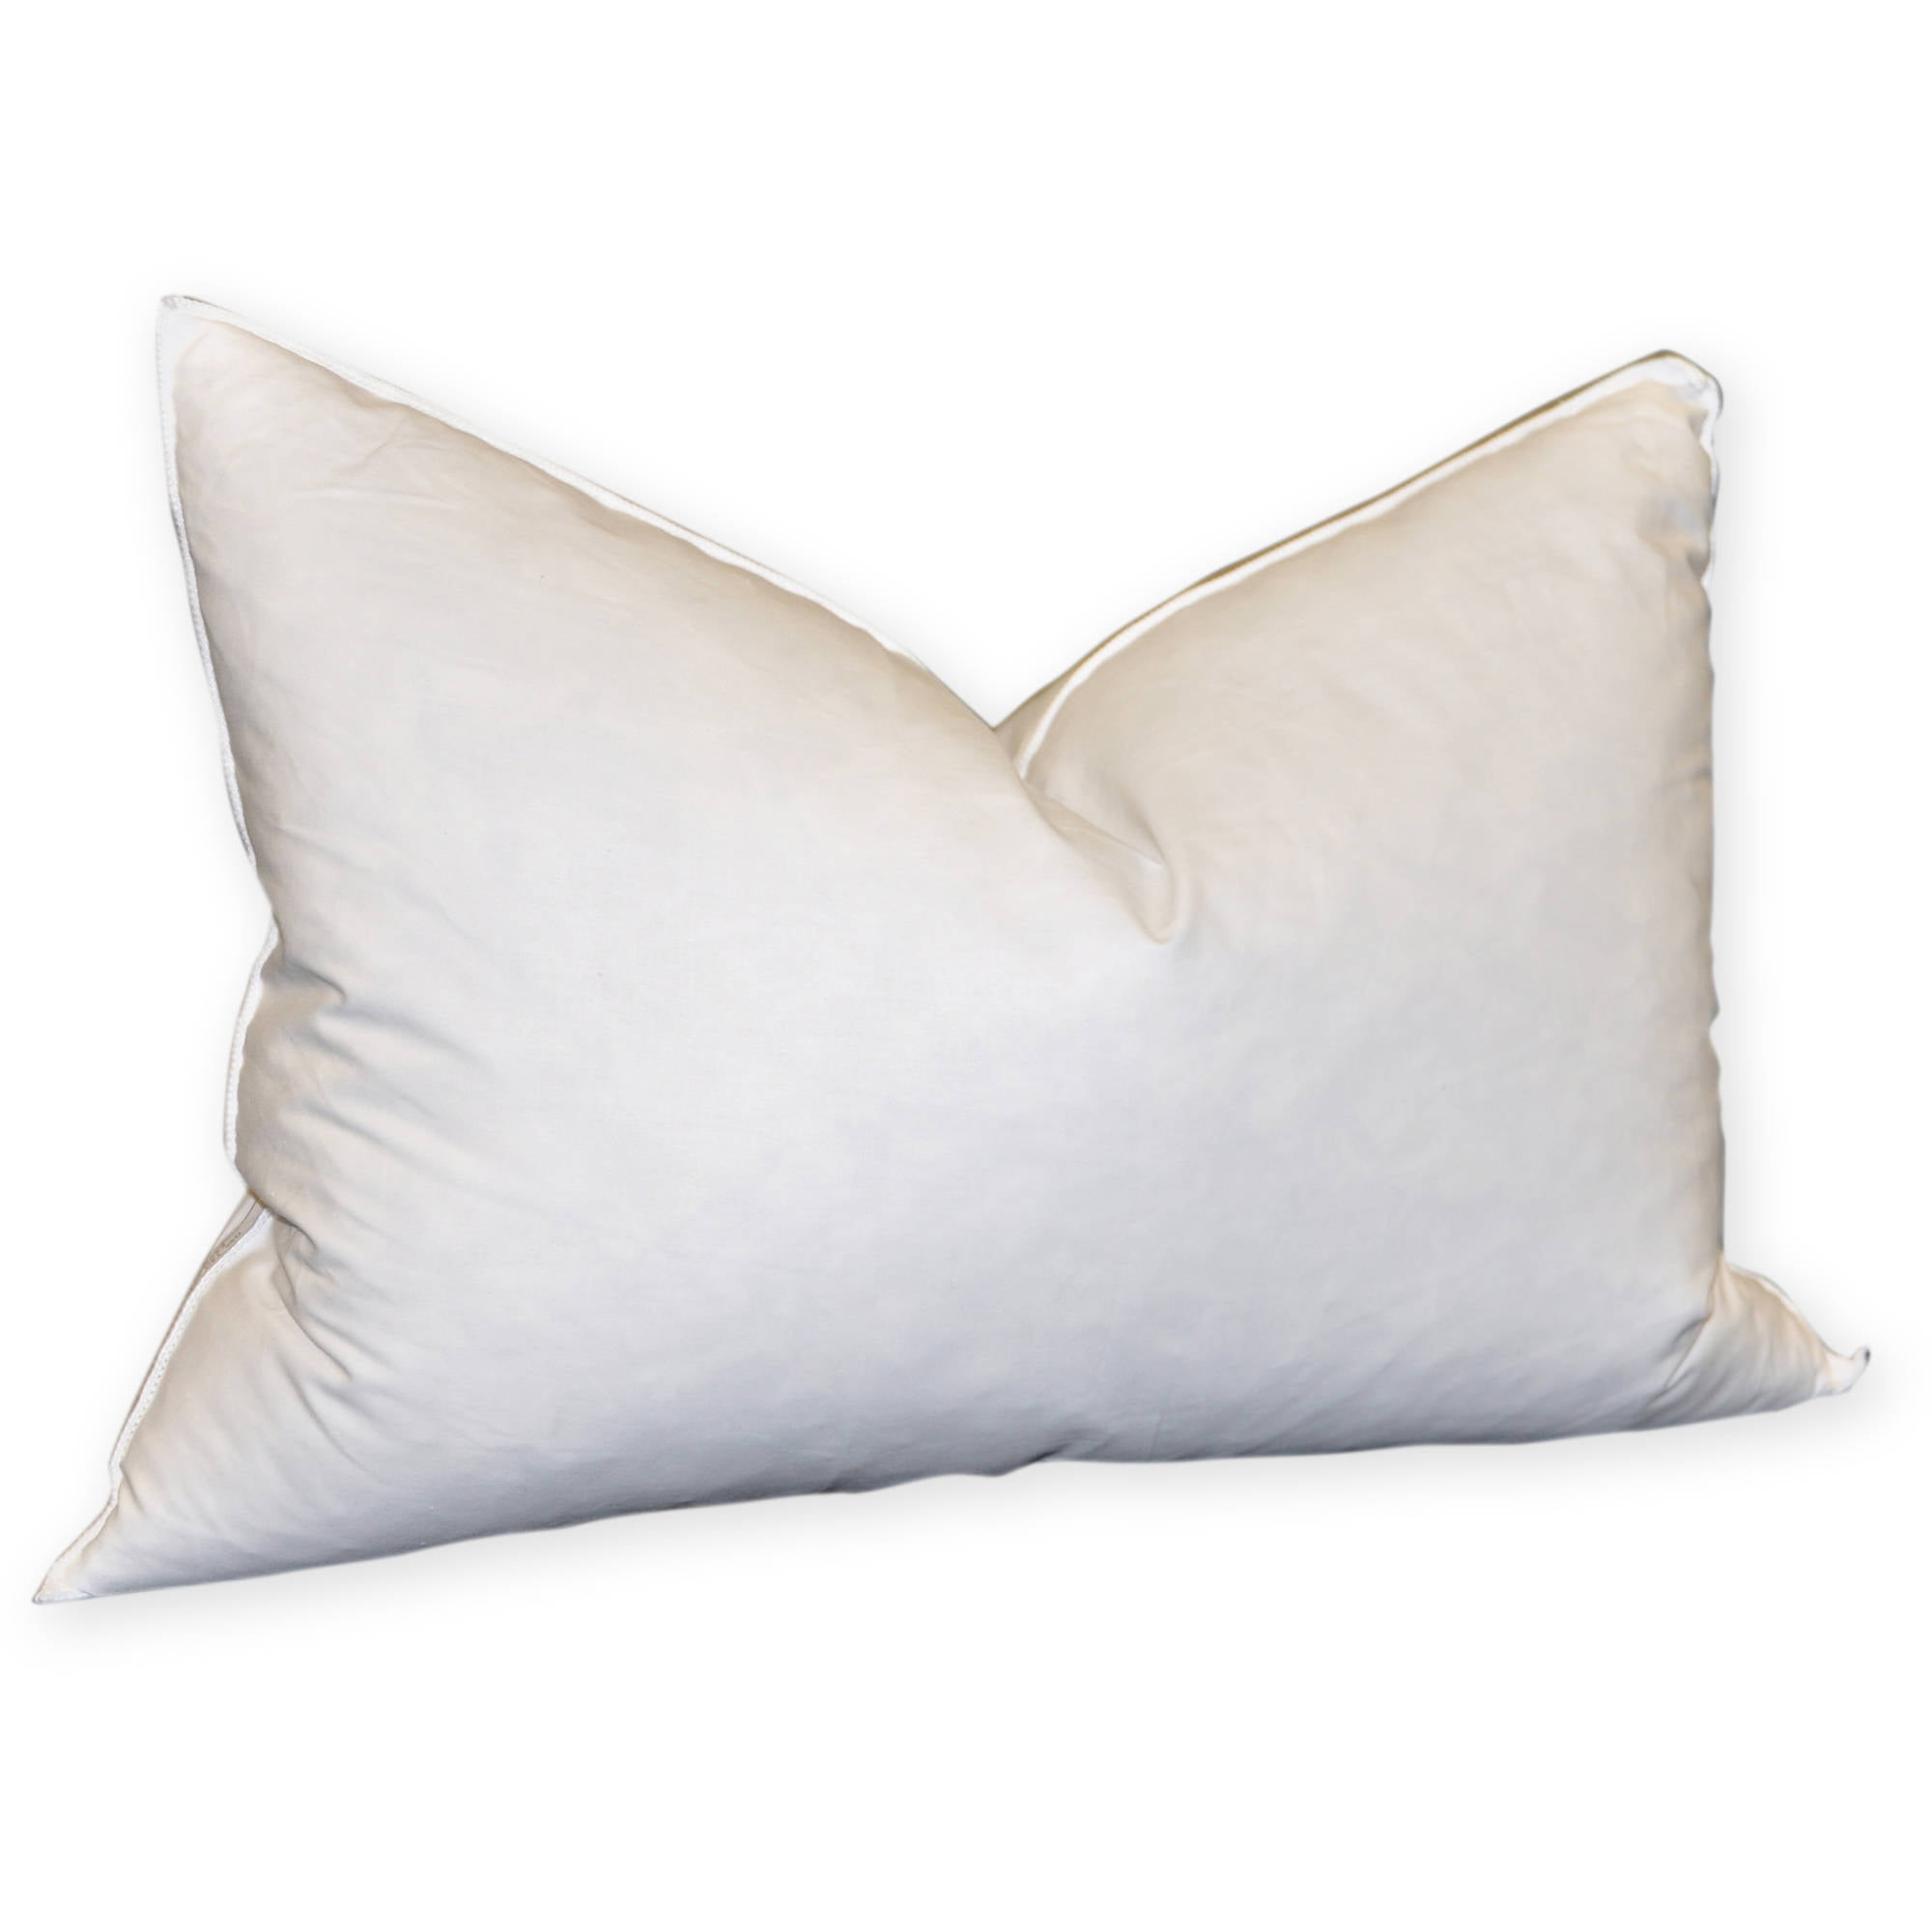 Feather Fil Feather & Down Pillow Insert 18inx18in